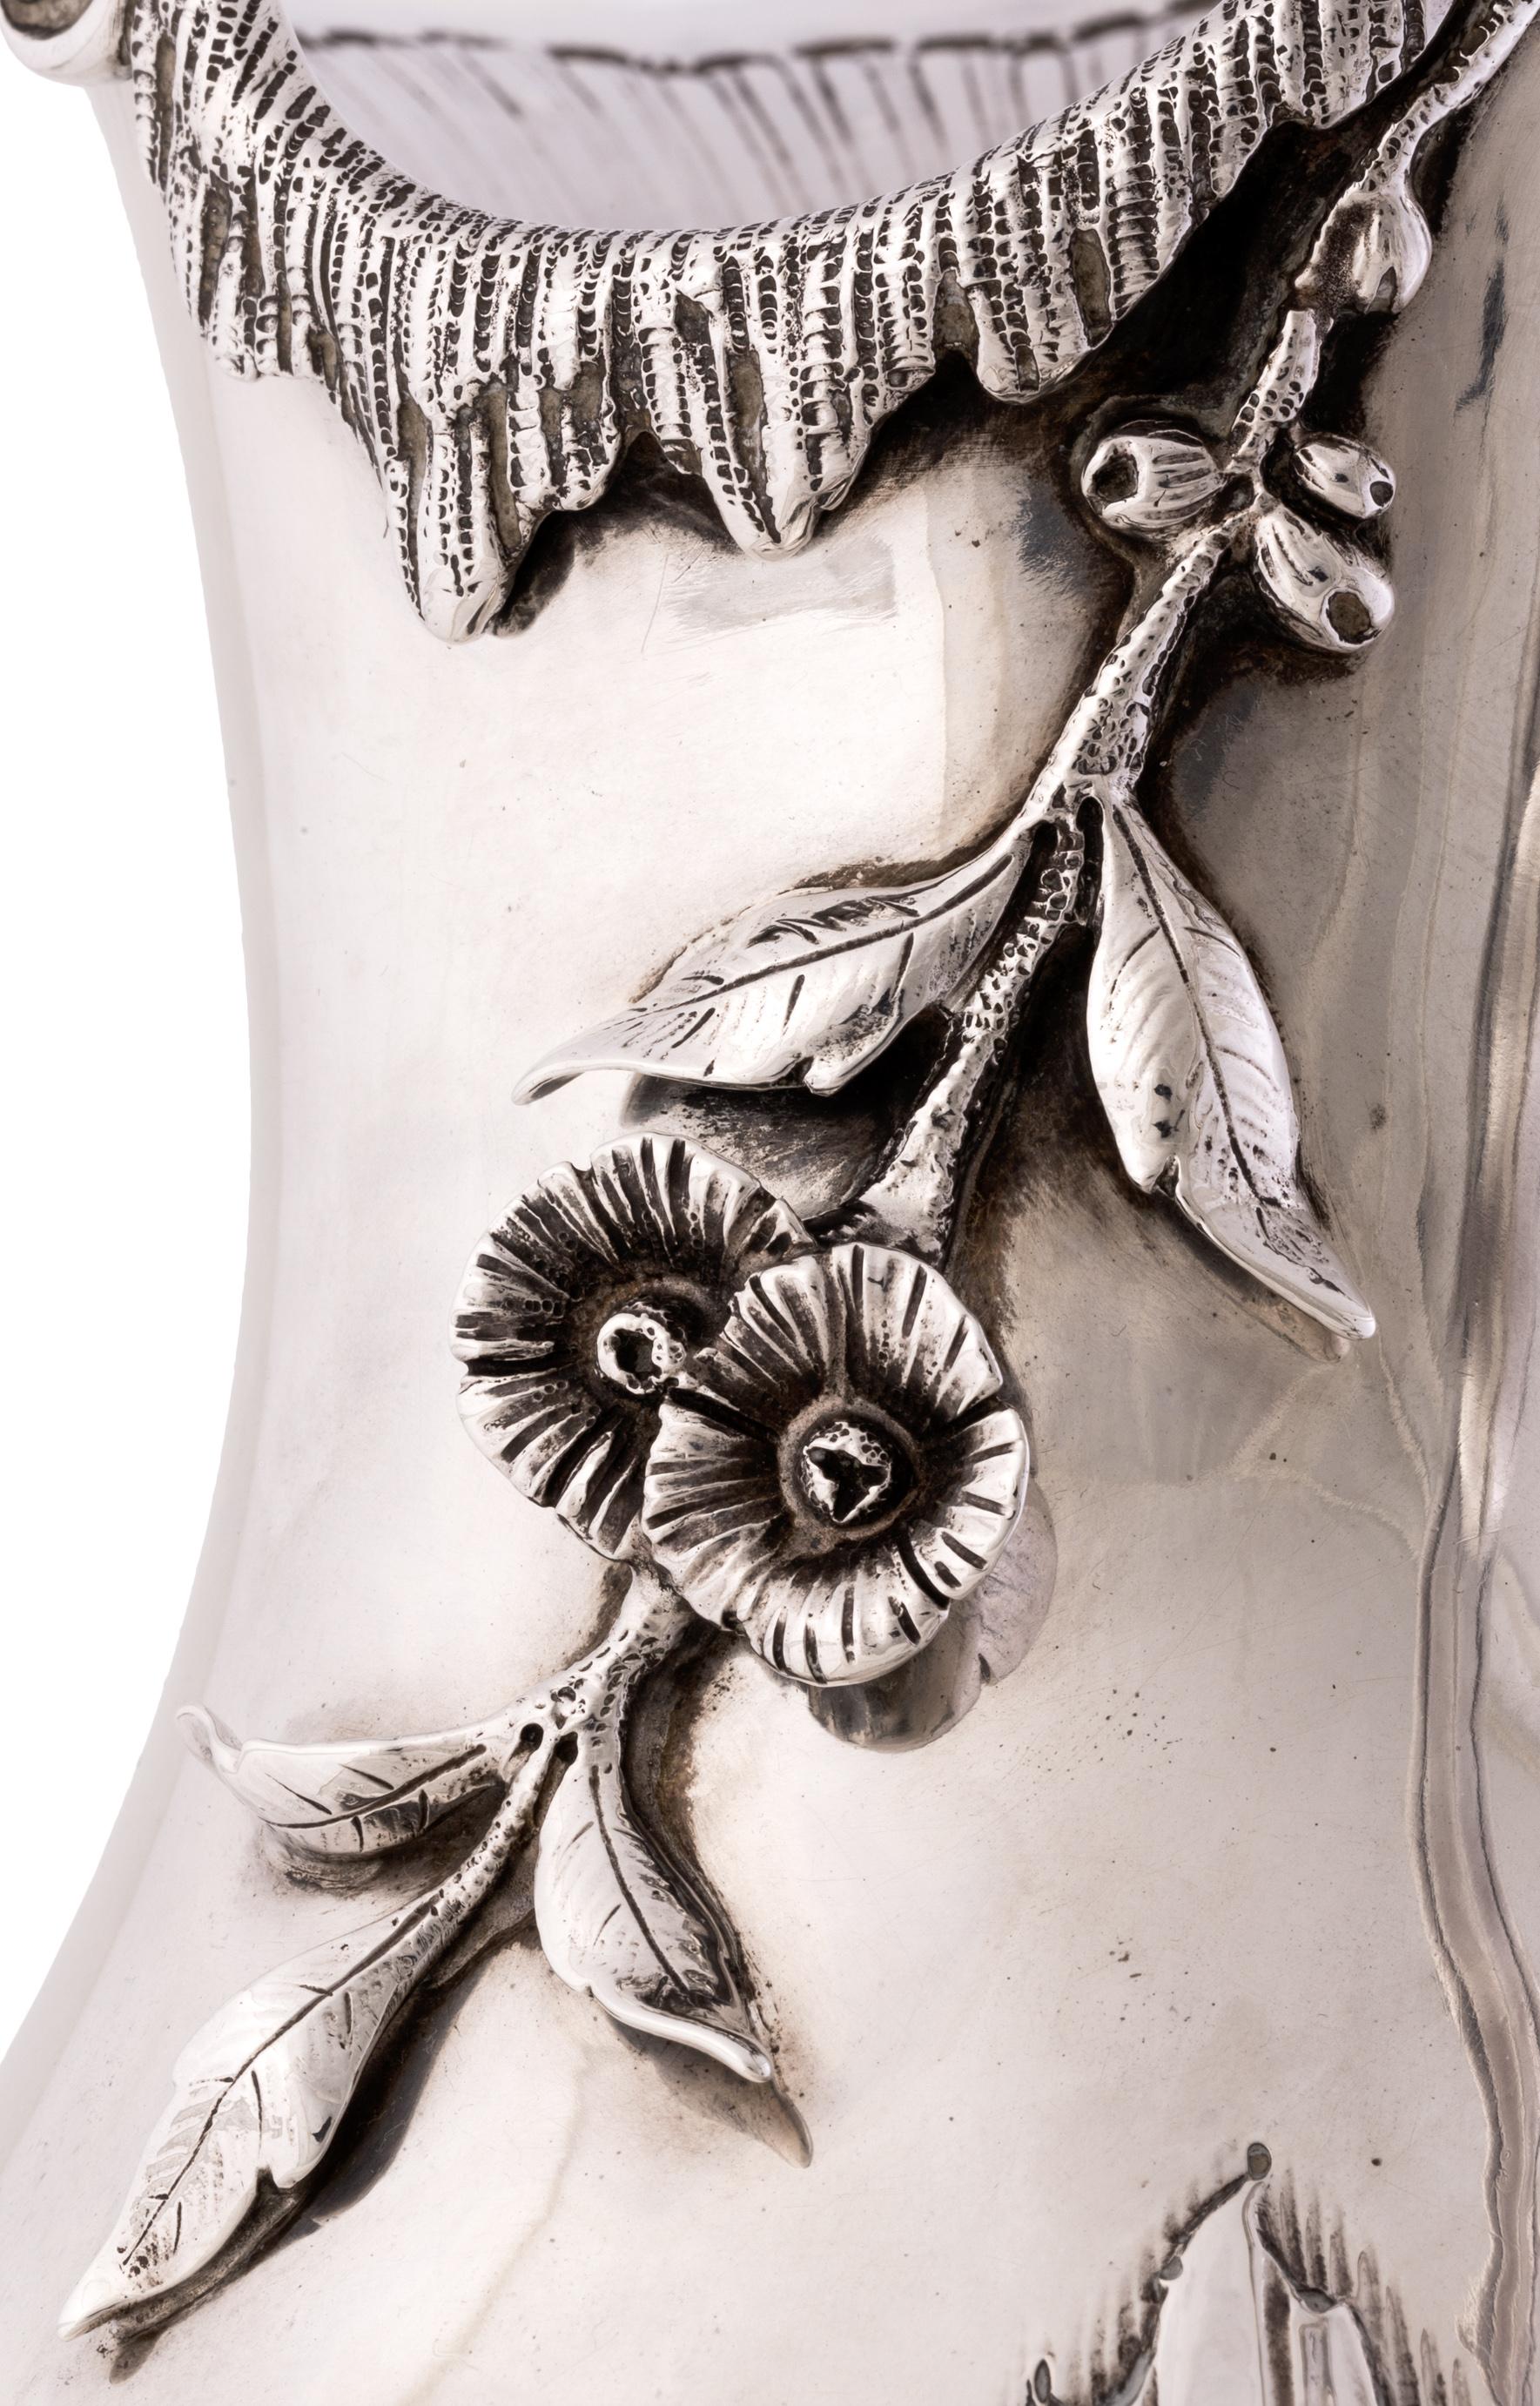 20th Century Large Silver Water Pitcher with Sculptural Floral Detailing